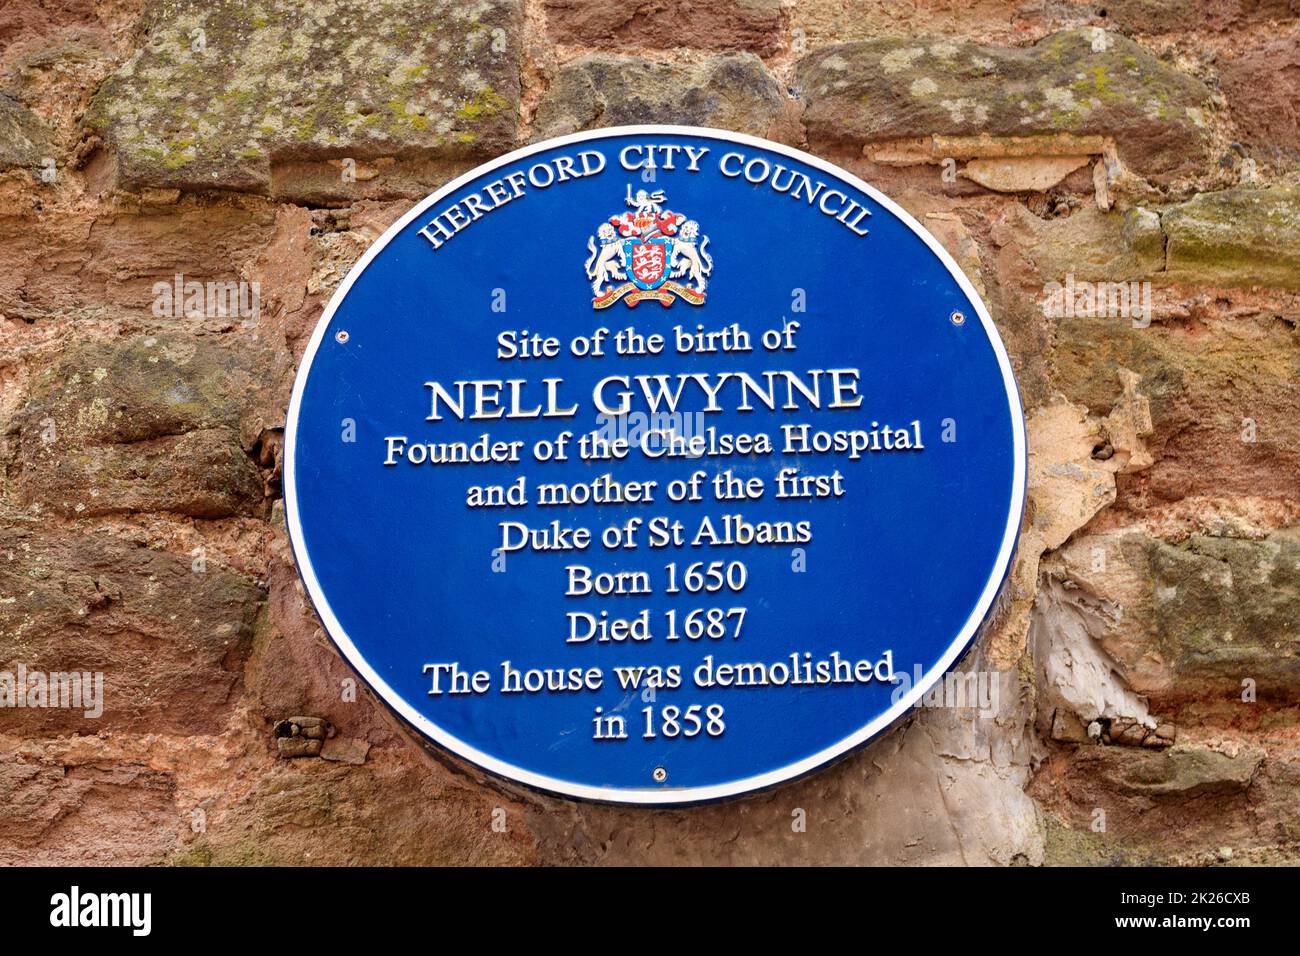 The Nell Gwynne blue plaque in Gwynne Street, Hereford, Herefordshire, England, UK Stock Photo